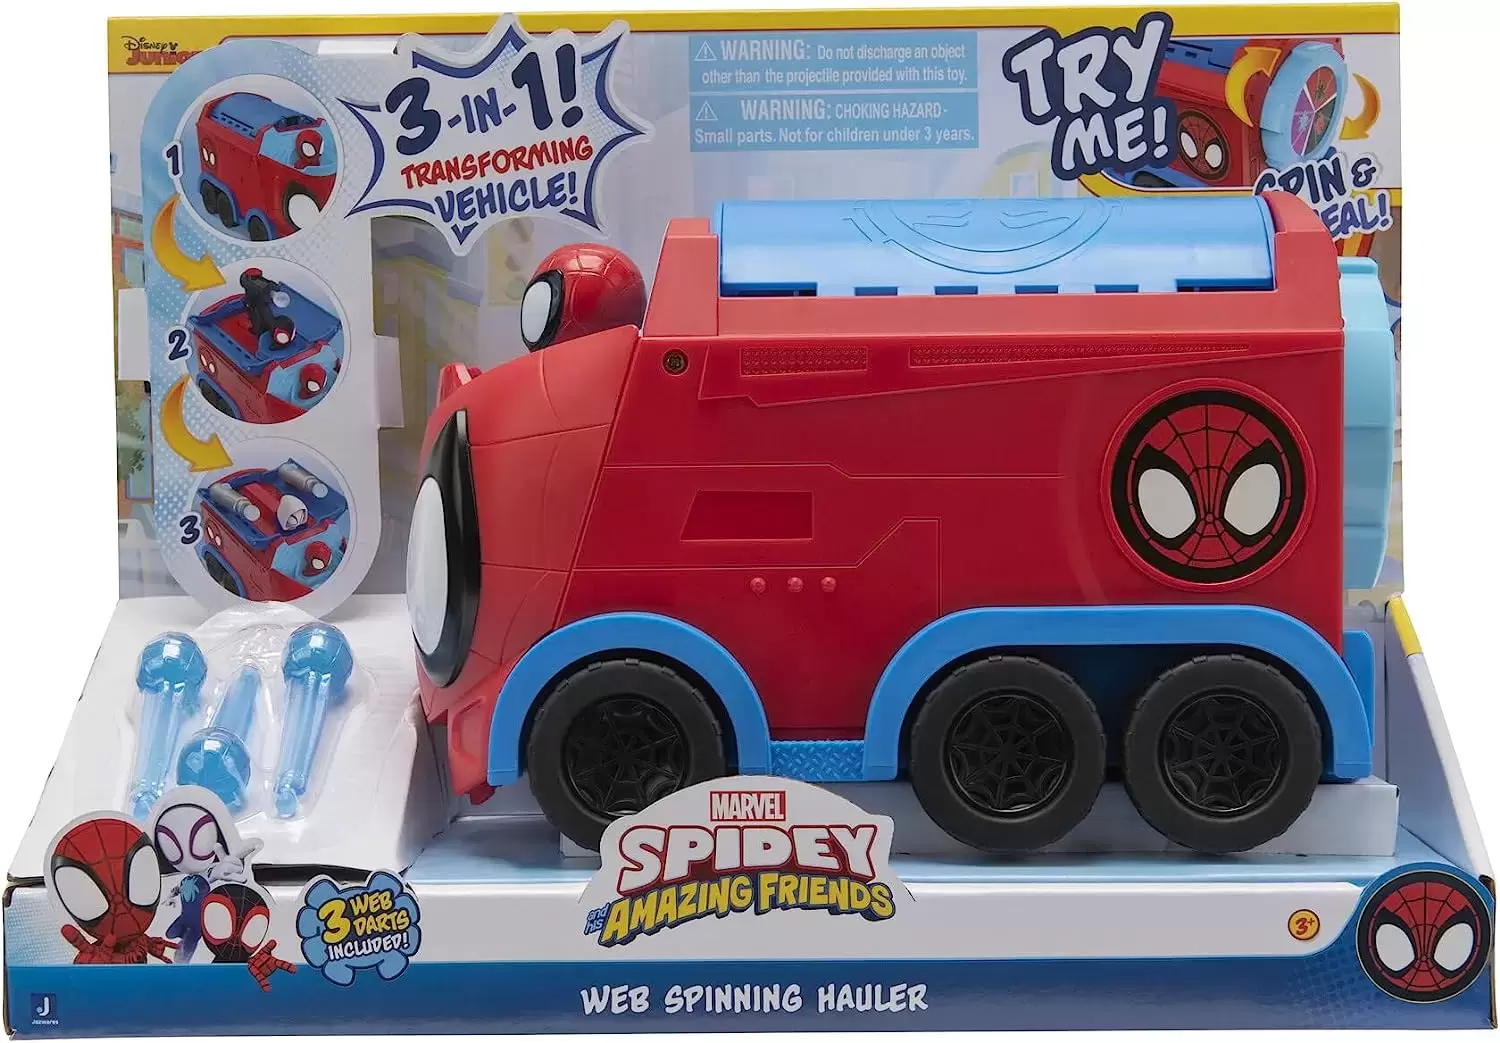 Spidey And His Amazing Friends - Web Spinning Hauler